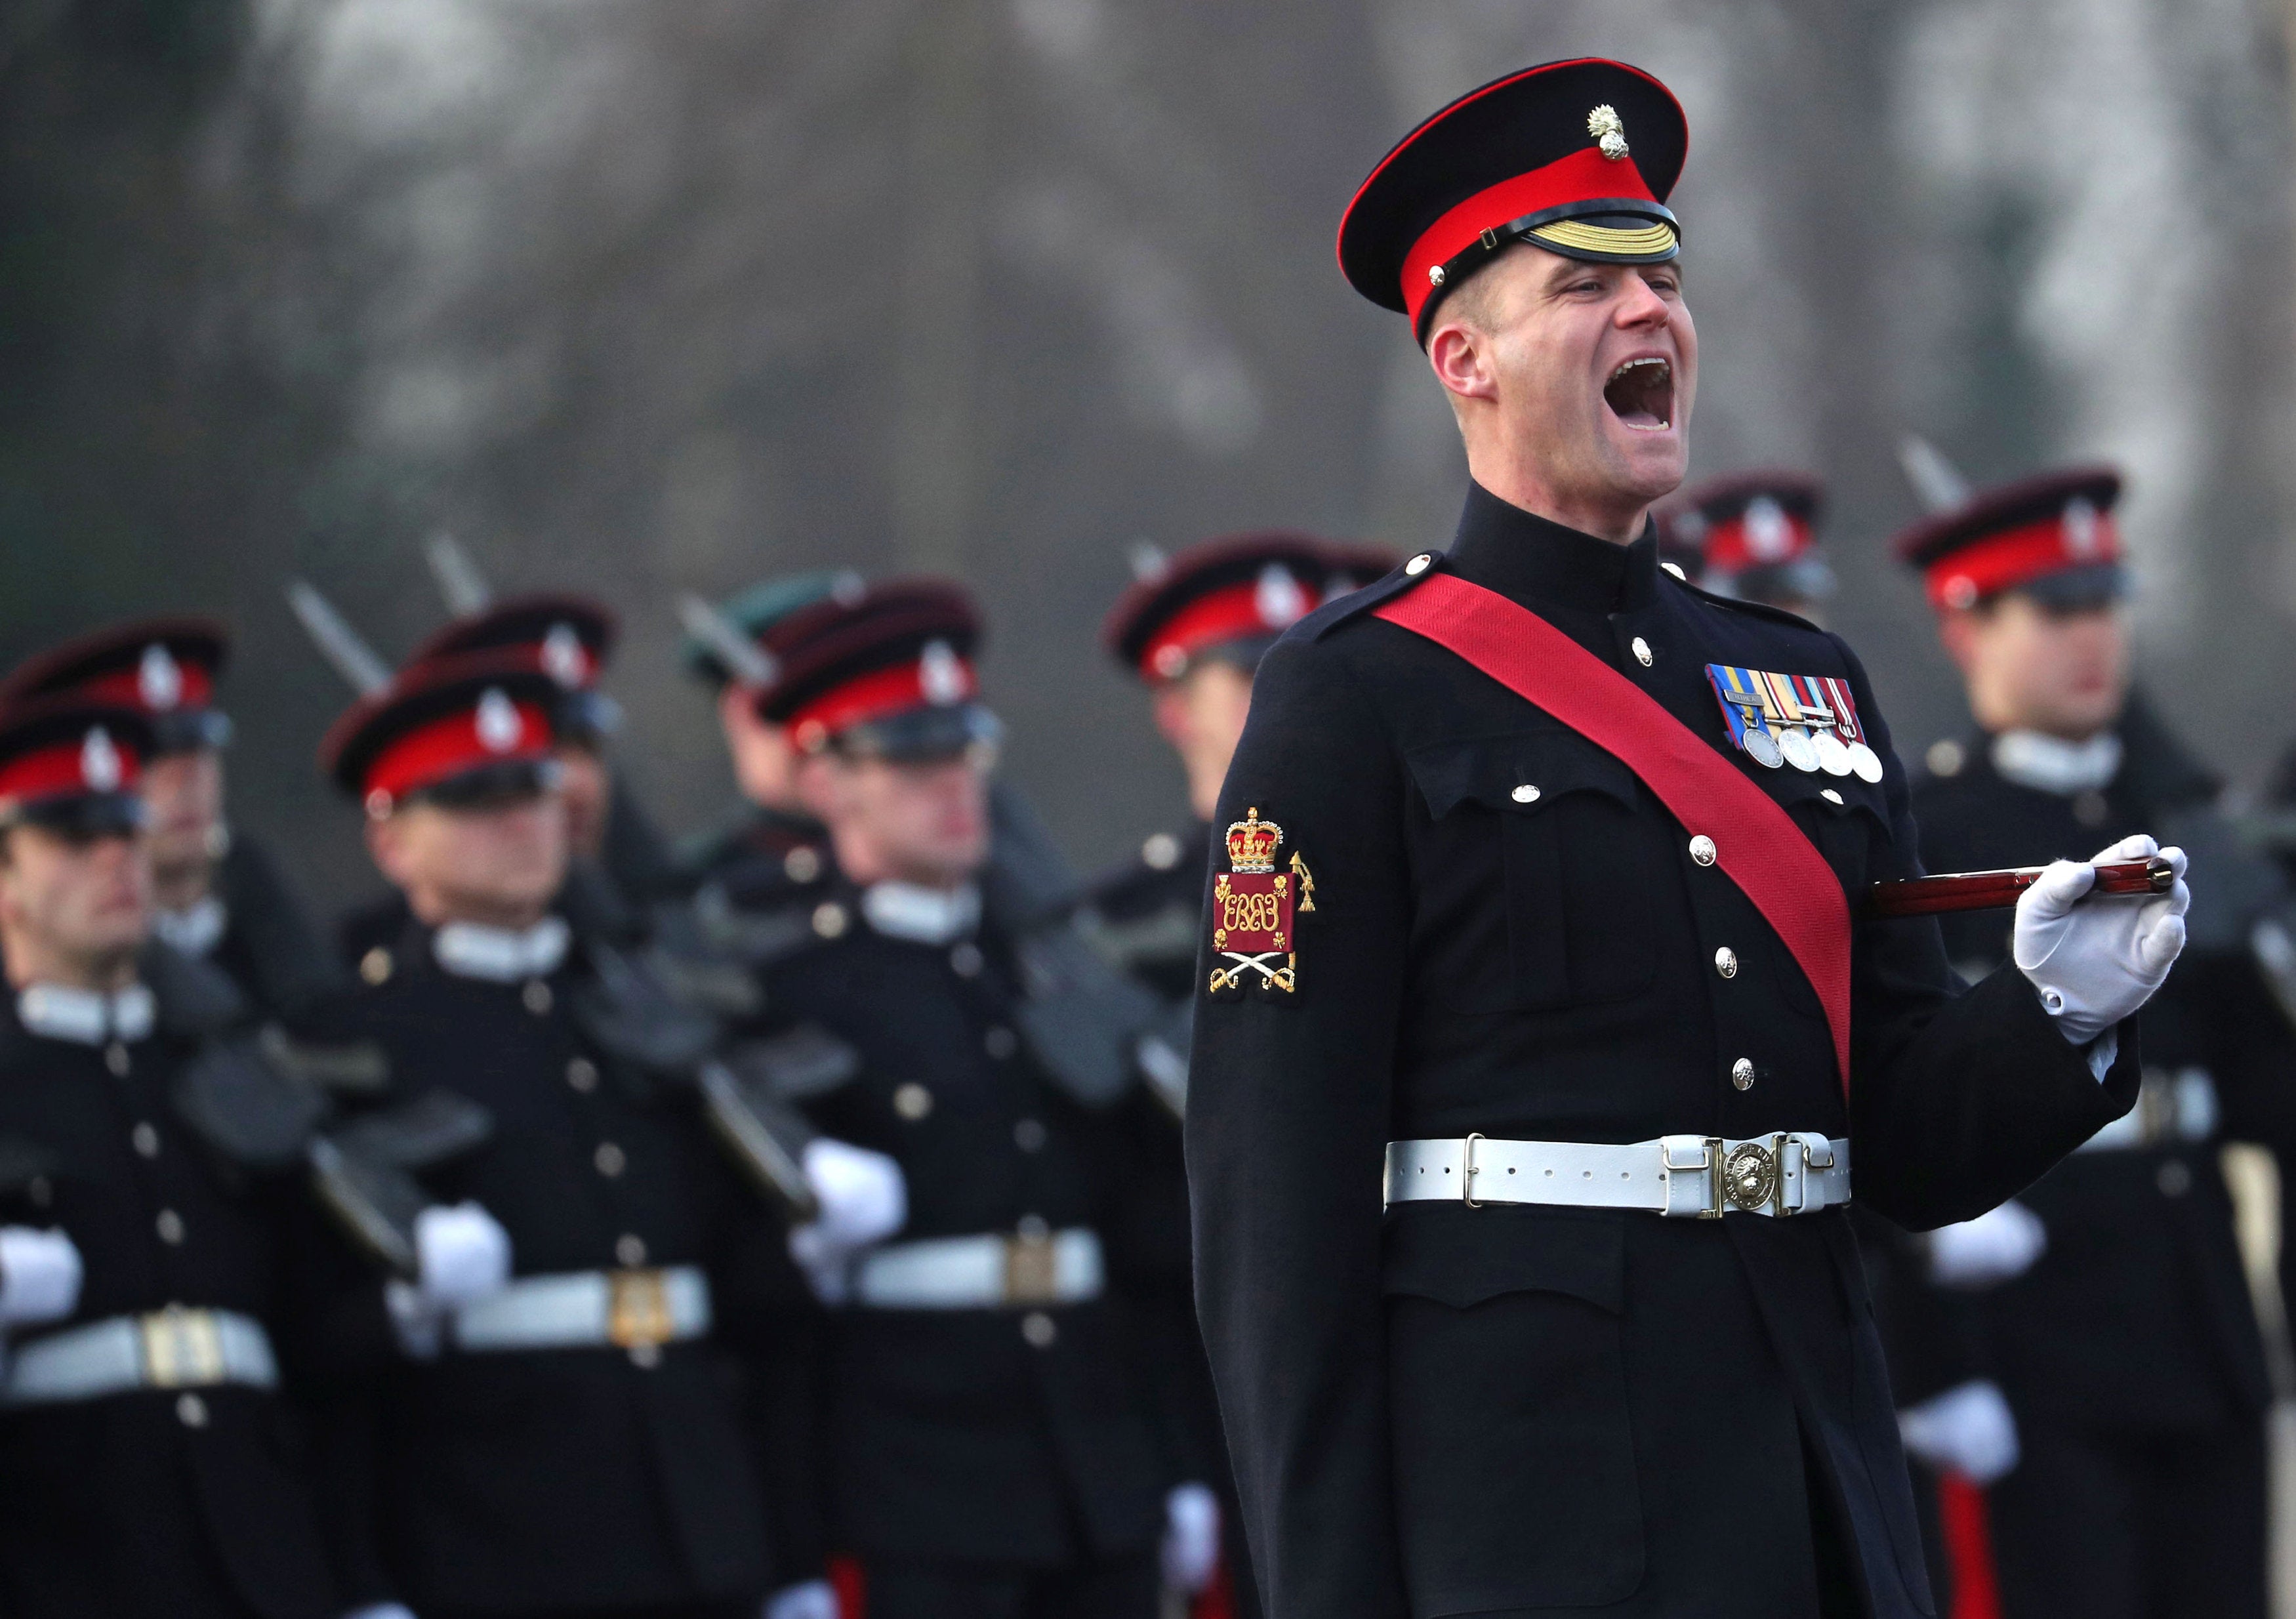 A sergeant major shouts instructions at Royal Military Academy Sandhurst